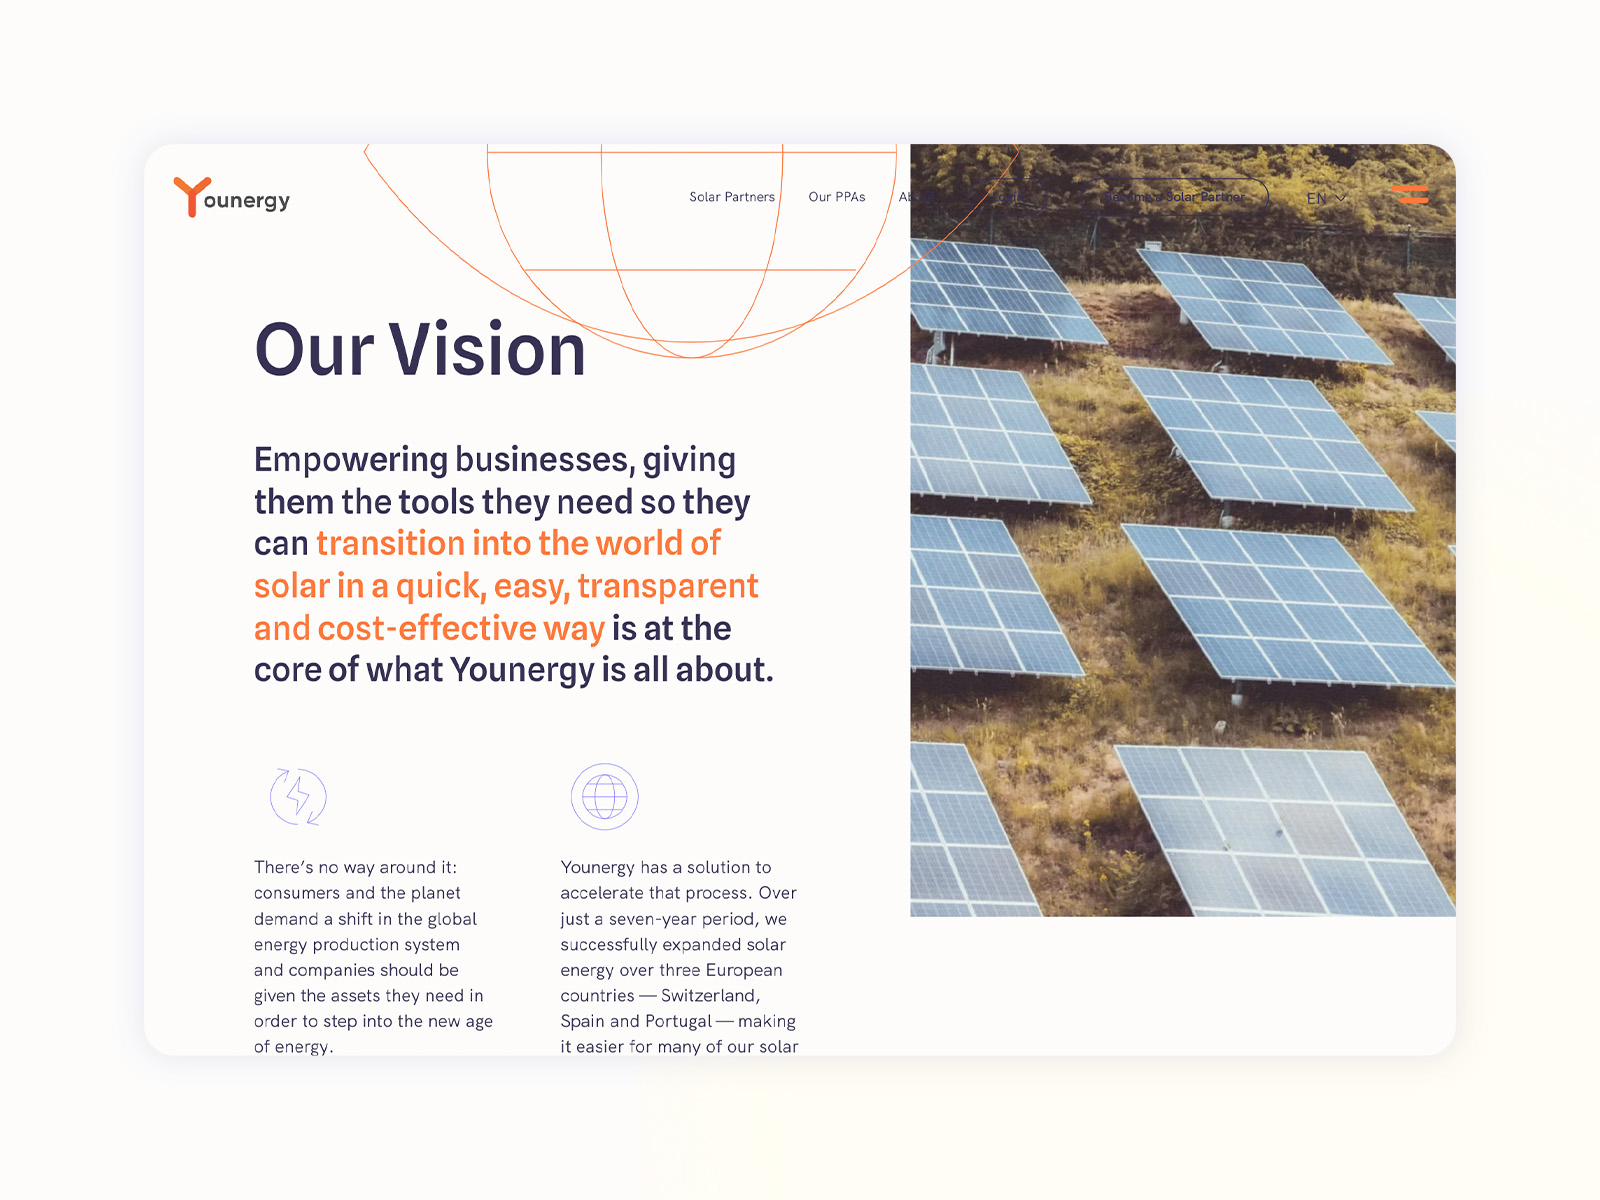 About US - Our Vision